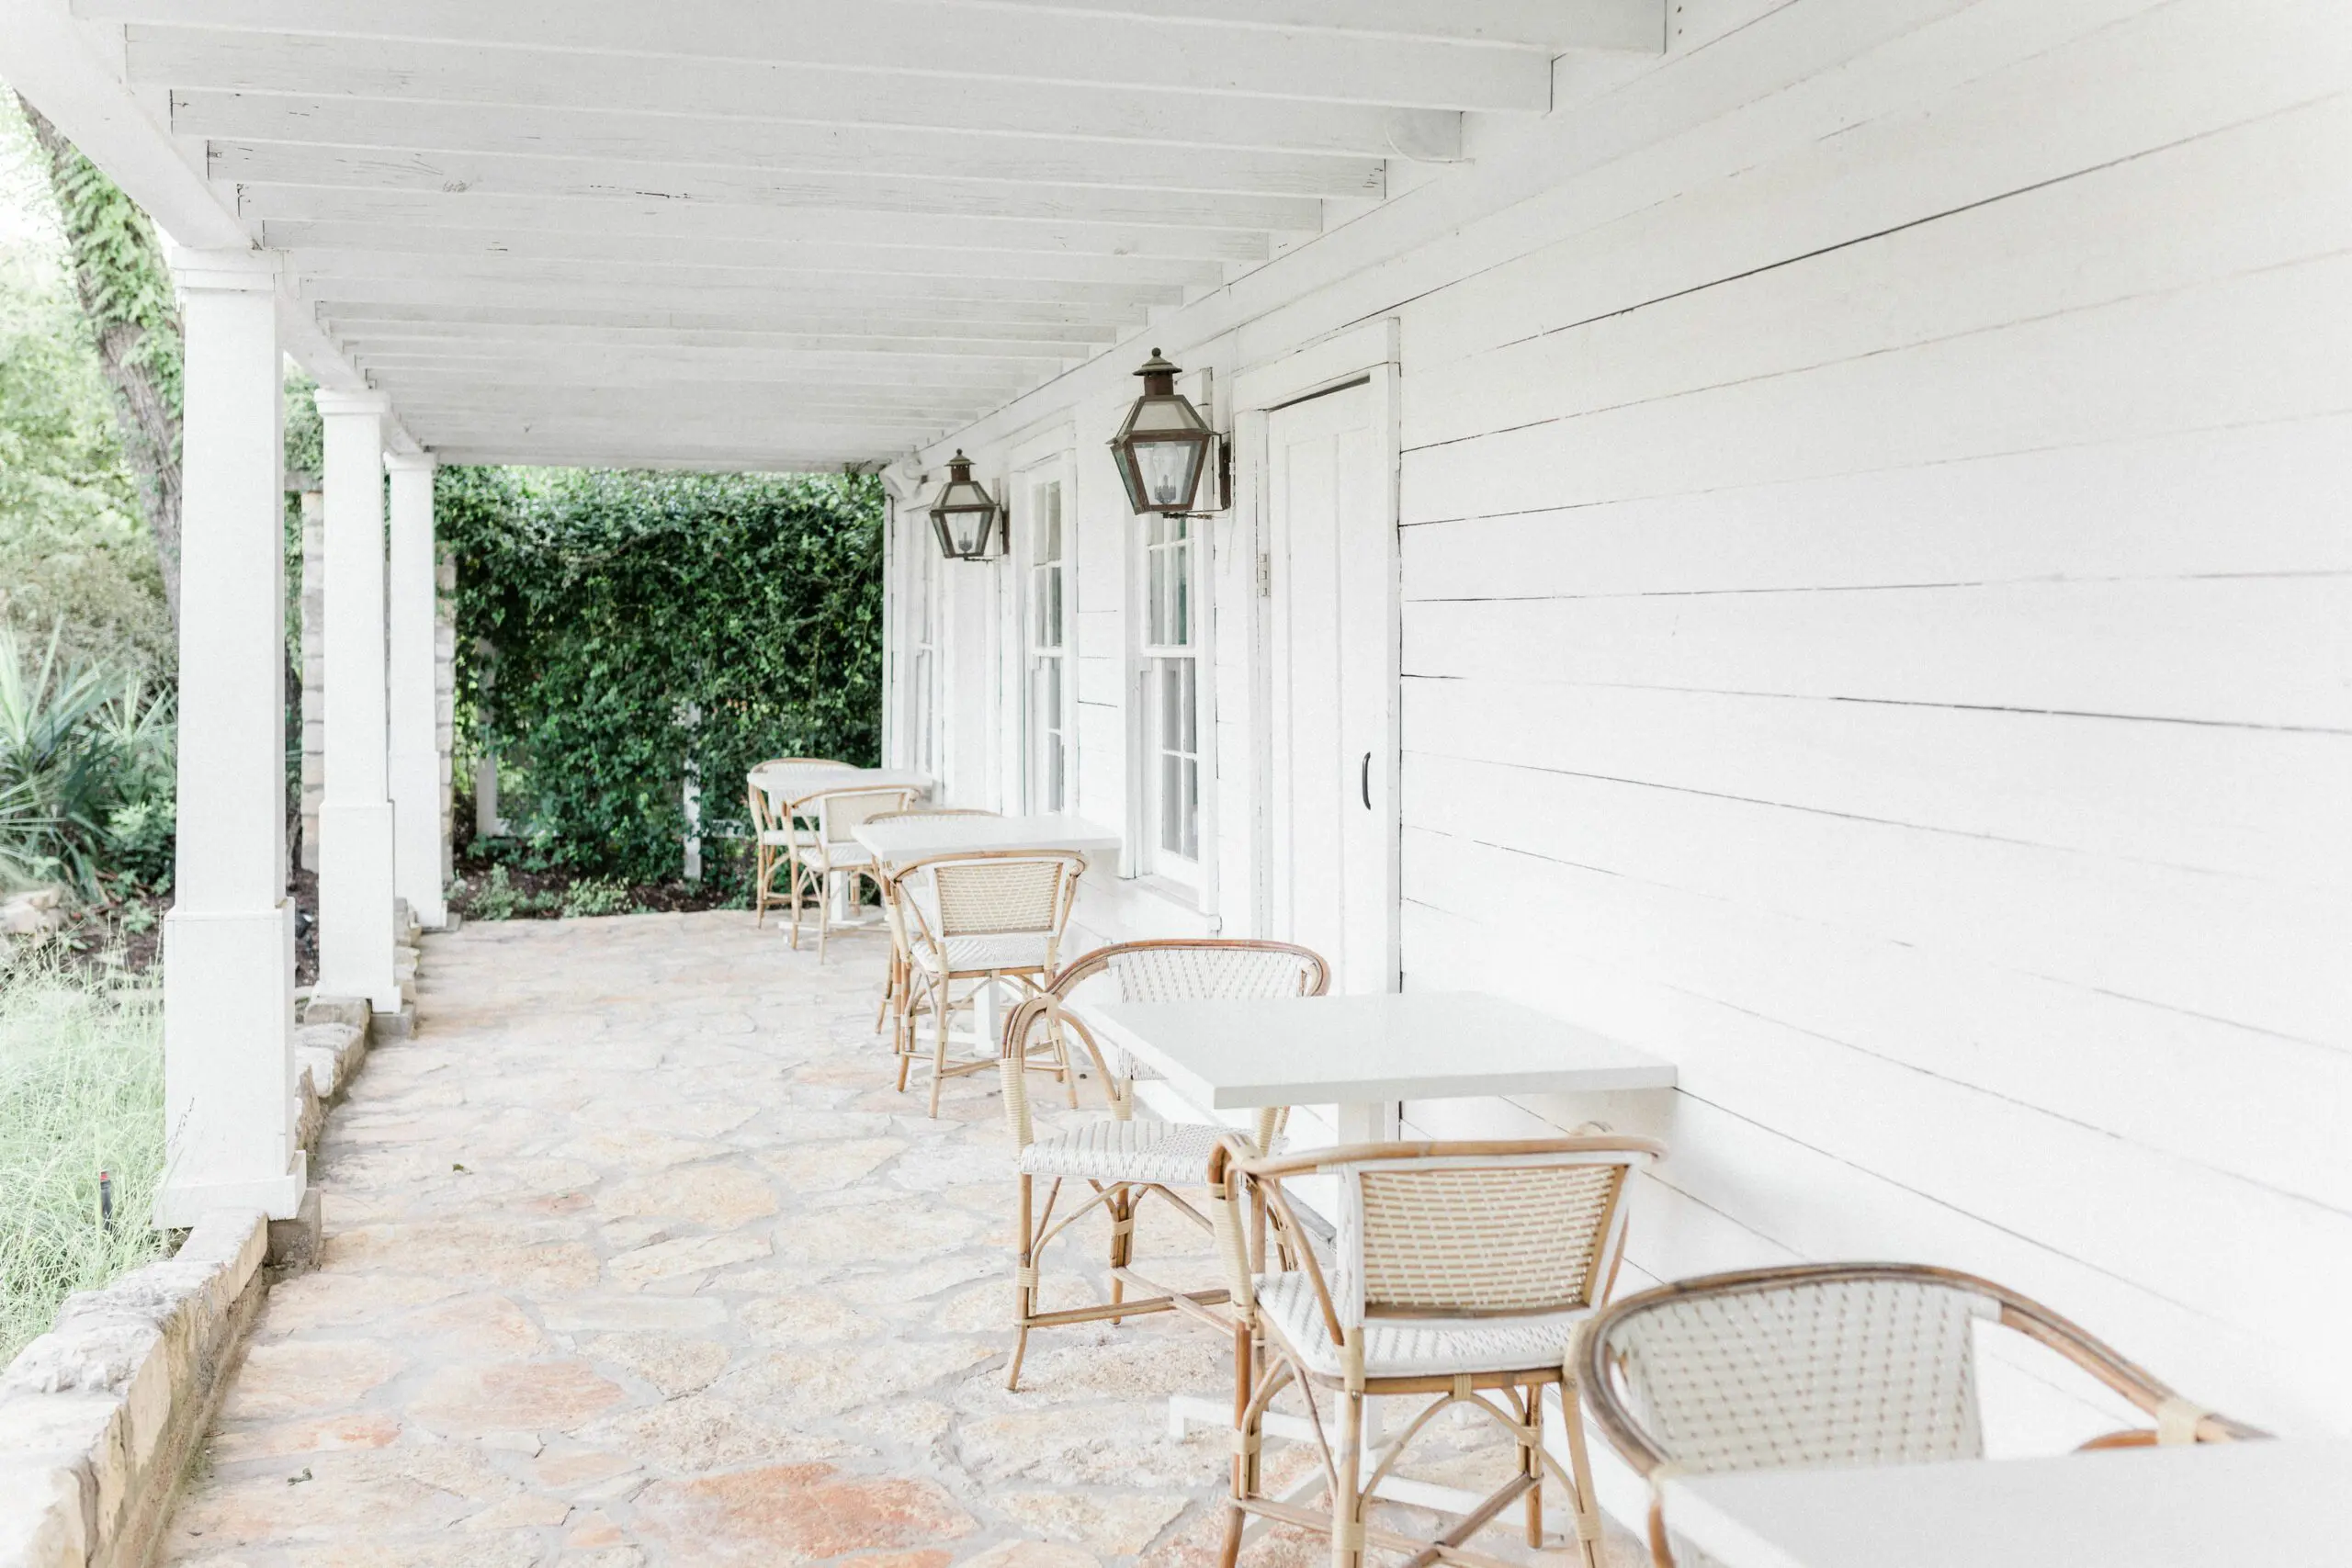 Charming outdoor patio at the Stagecoach Inn in Salado, Texas.